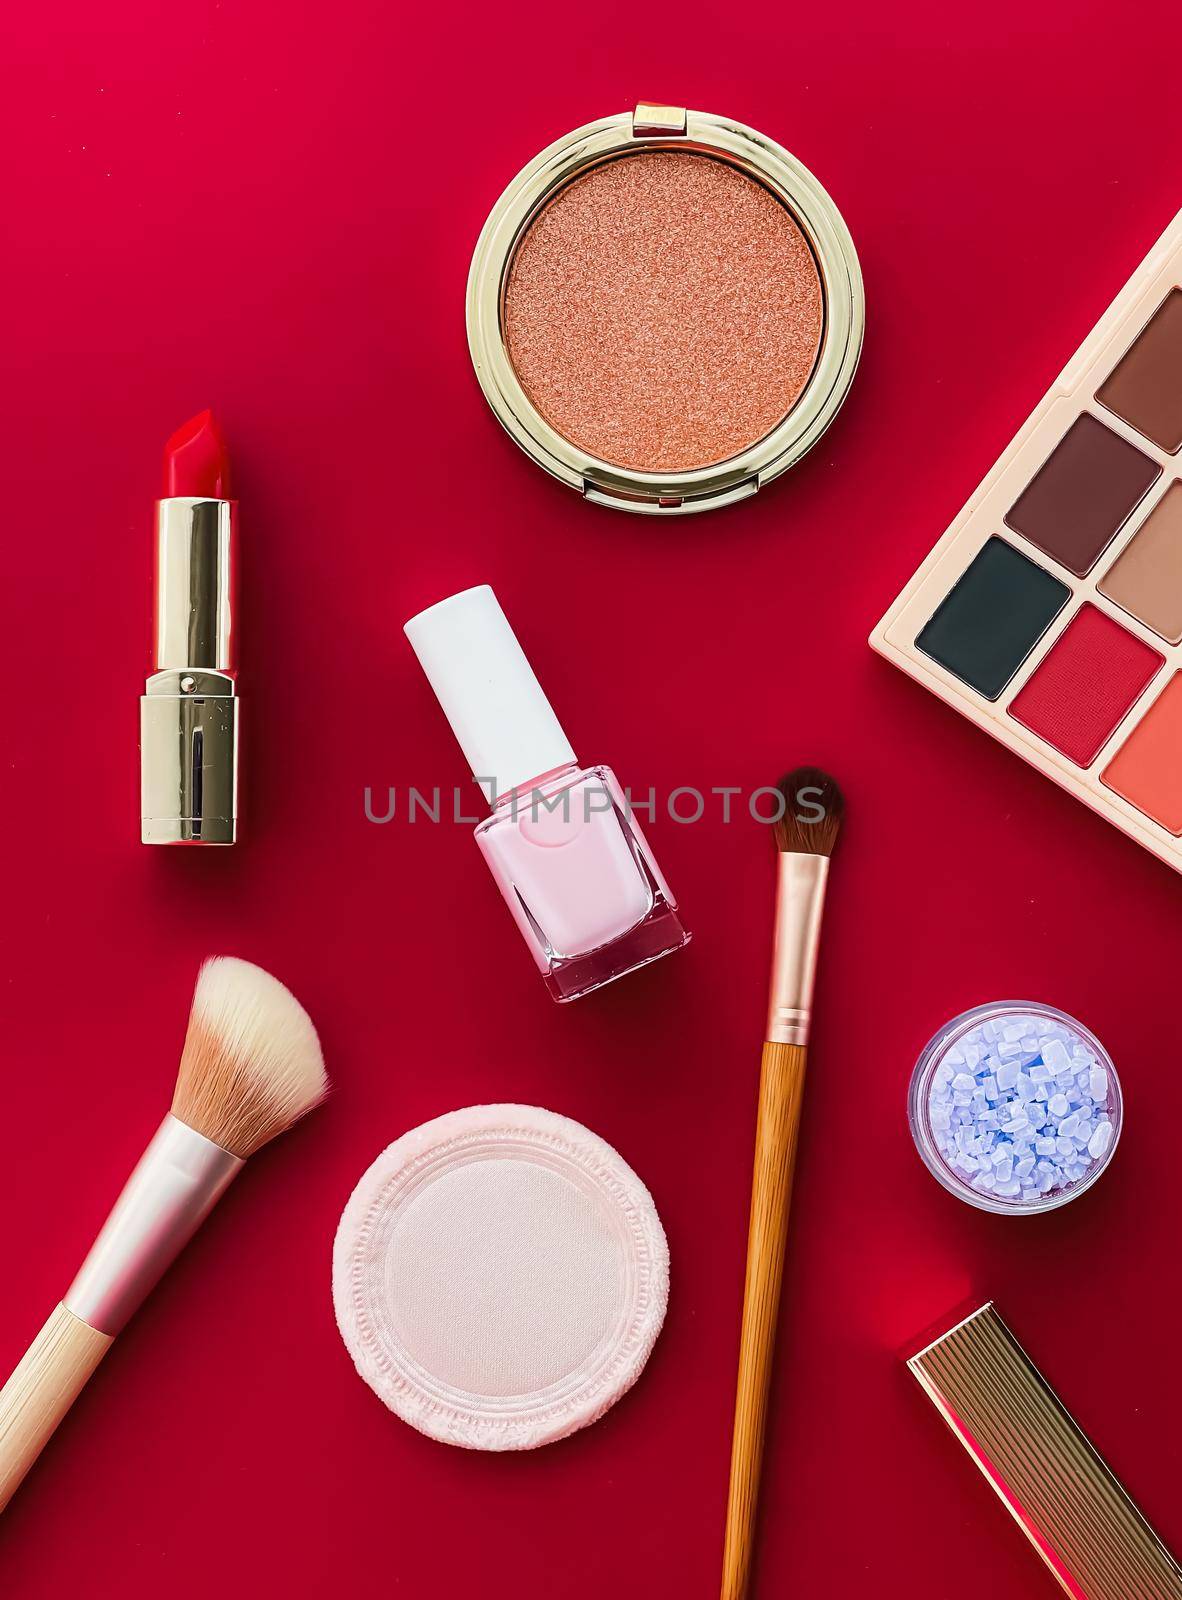 Beauty, make-up and cosmetics flatlay design with copyspace, cosmetic products and makeup tools on red background, girly and feminine style by Anneleven